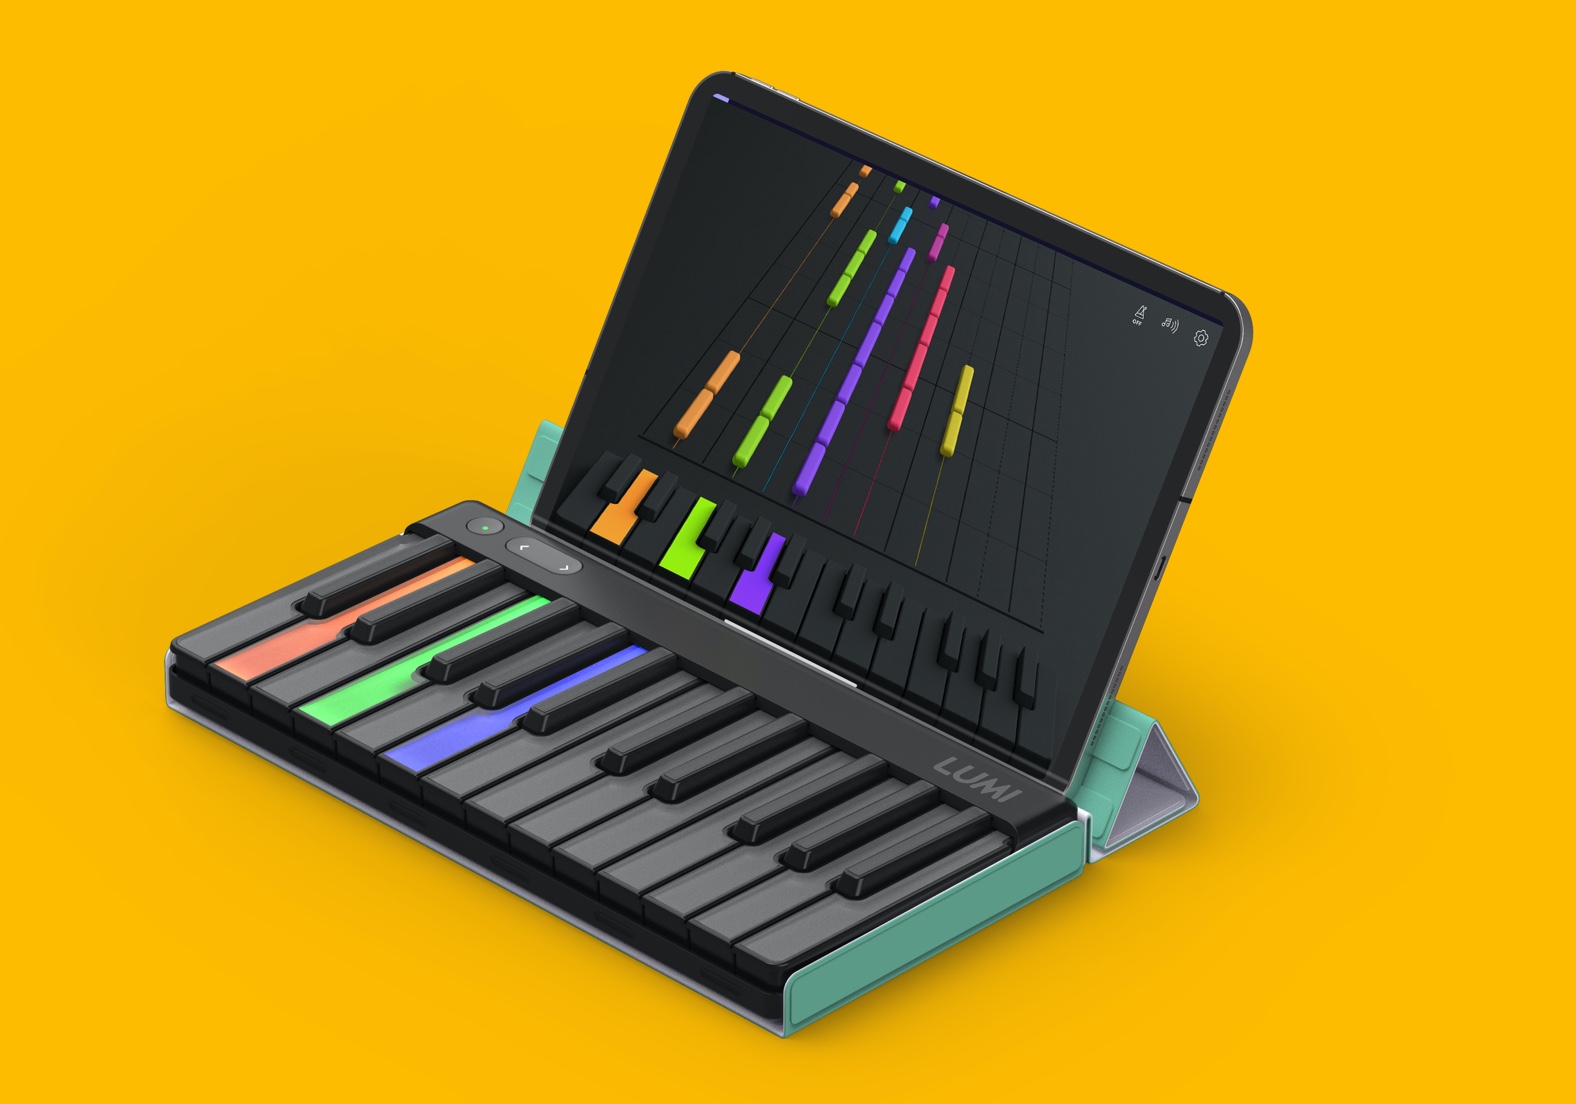 ROLI return with LUMI, a rainbow keyboard that makes learning bright and fun  - RouteNote Blog